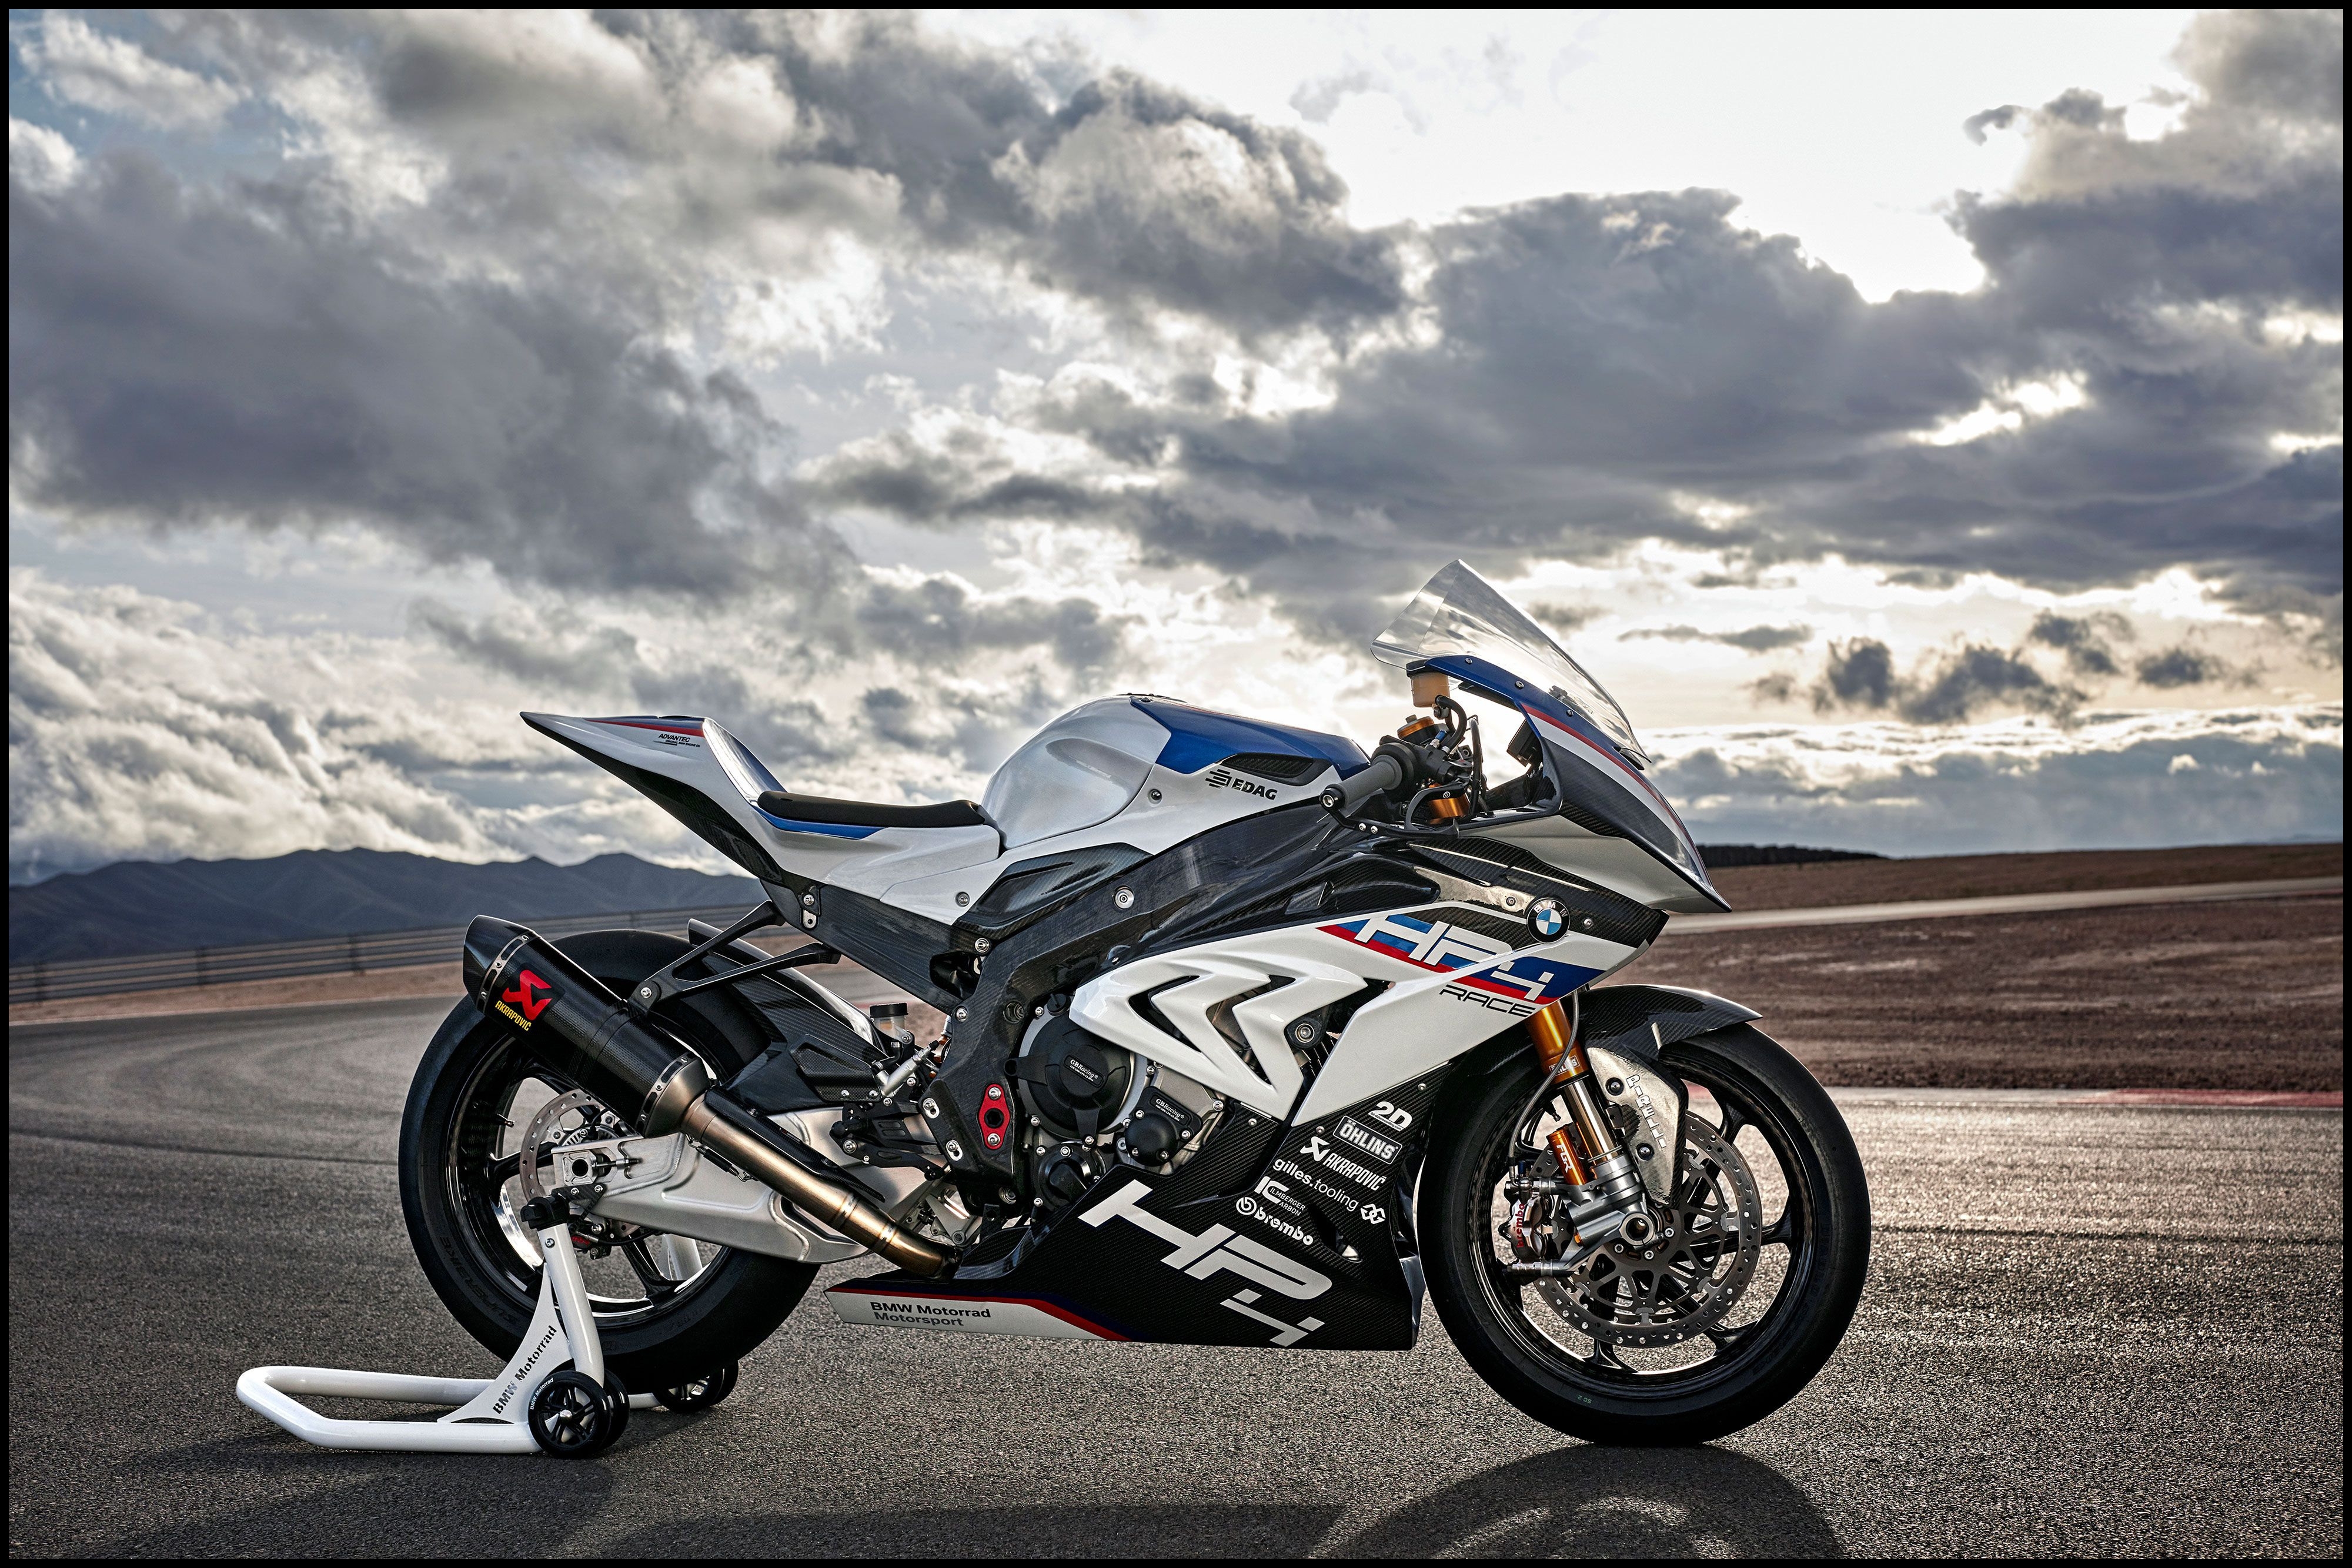 Bmw Hp4 2018 Overview and Price Bmw Hp4 2018 New Reviews 2018 Bmw Hp4 Race Bmwmotorrad